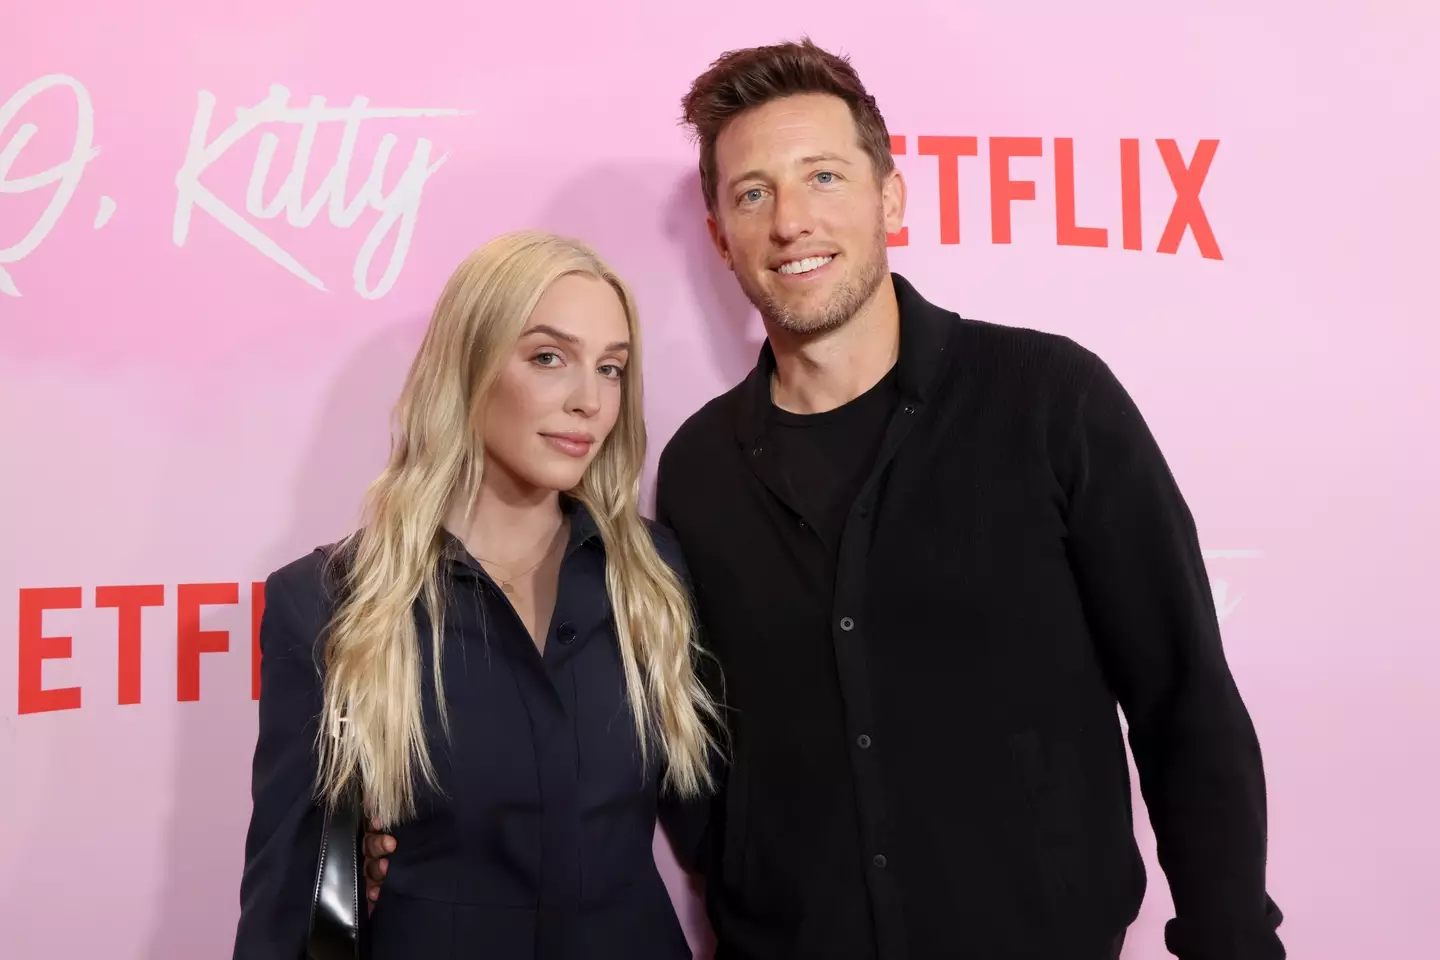 Alex Cooper and Matt Kaplan started dating during the pandemic (Rodin Eckenroth/Getty Images for Netflix)